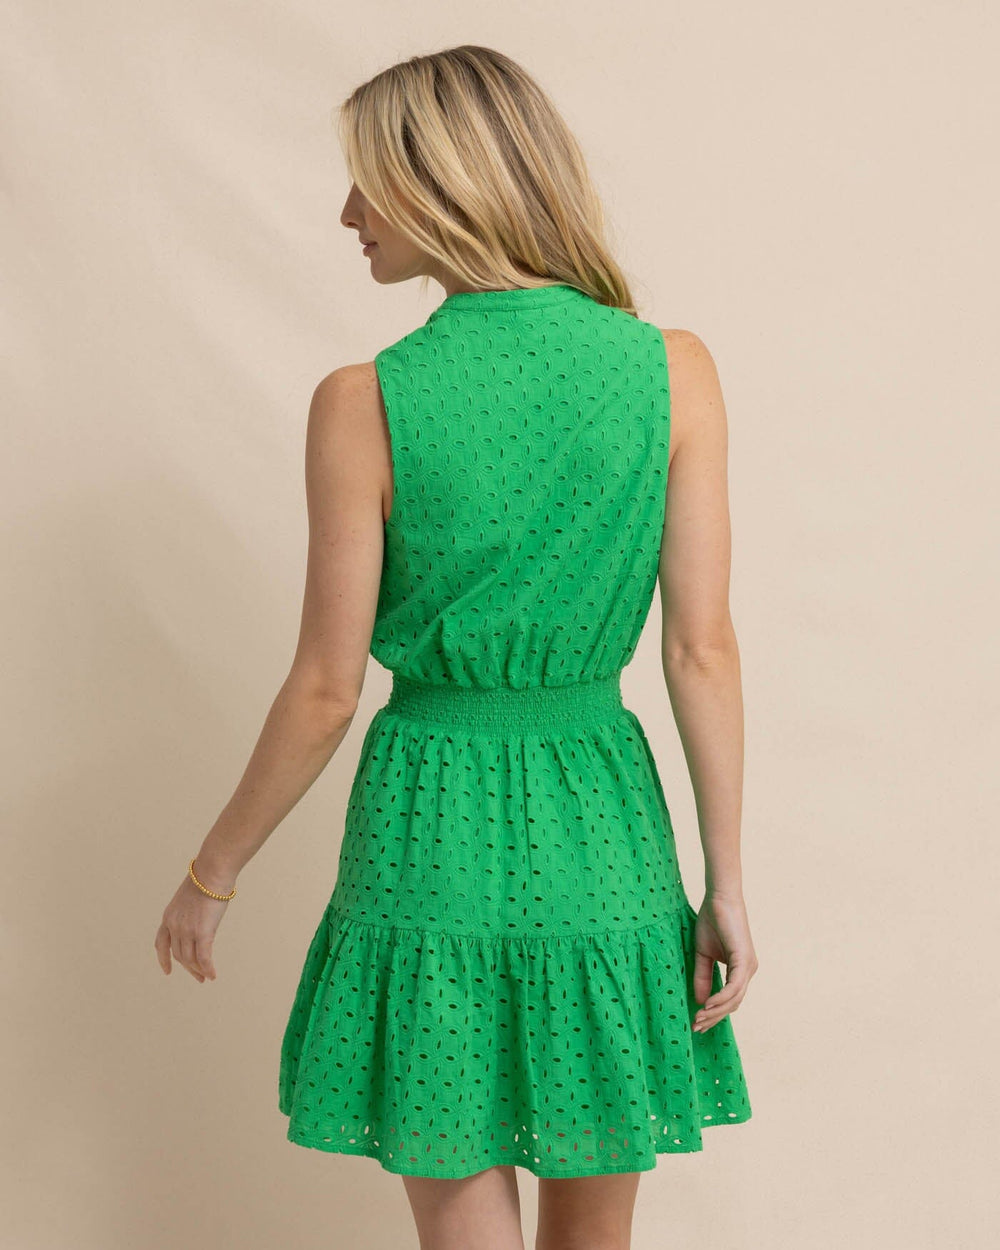 The back view of the Southern Tide Londyn Eyelet Dress by Southern Tide - Lawn Green